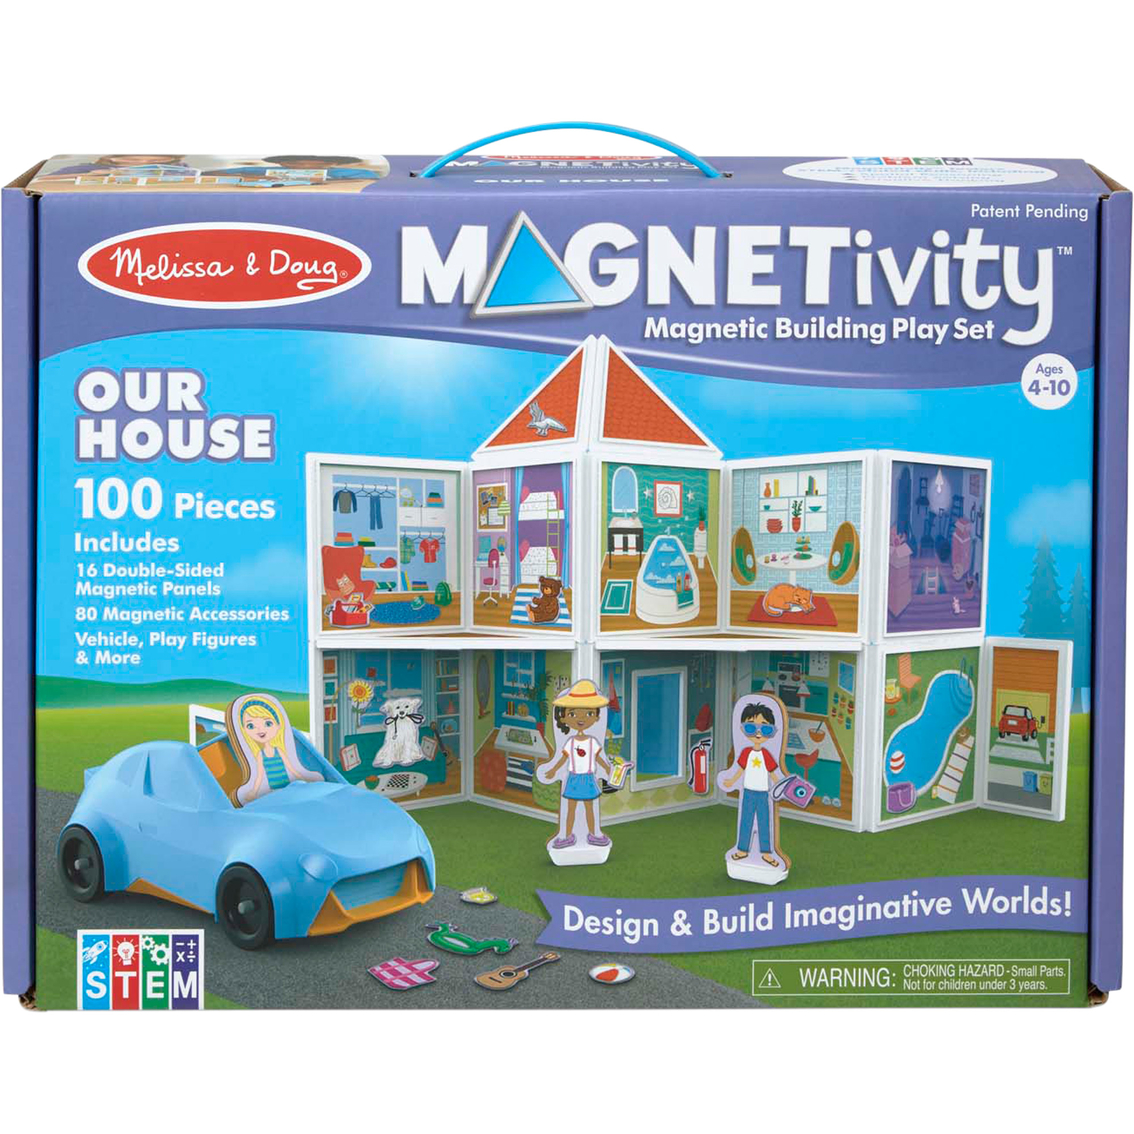 Melissa & Doug Magnetivity Magnetic Building Play Set, Our House - Image 2 of 4